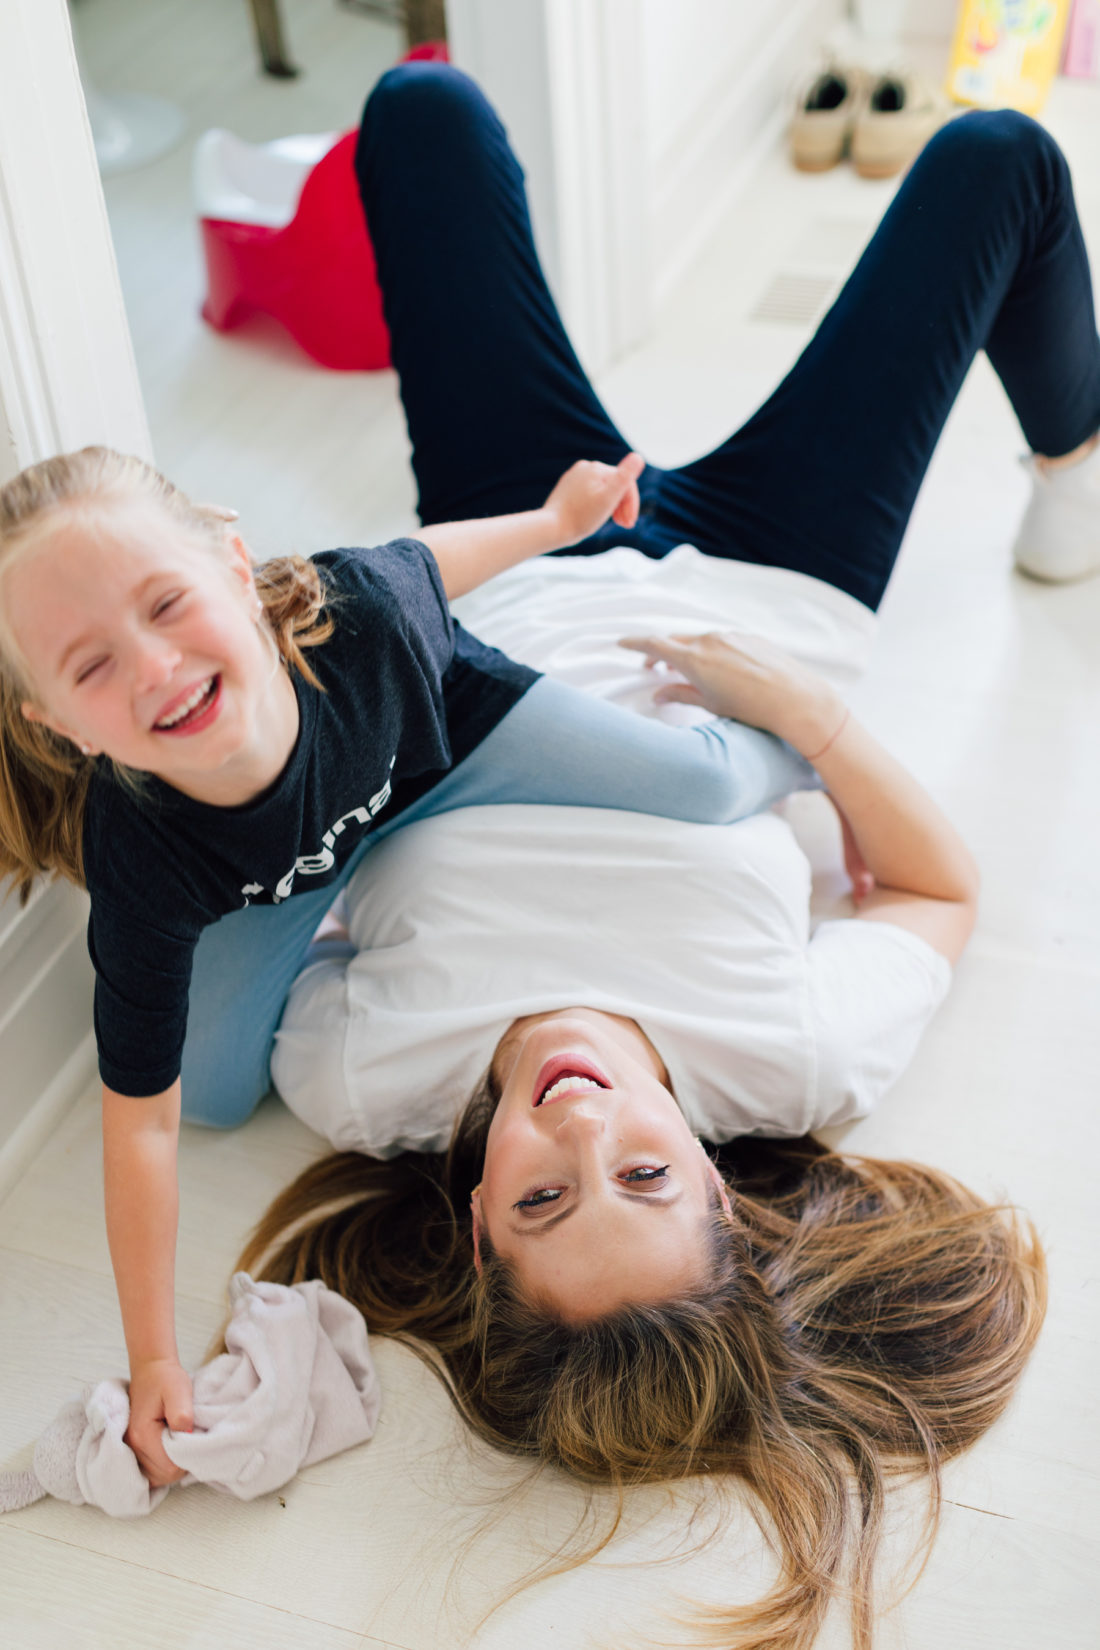 Eva Amurri Martino laughs on the floor laughing with daughter Marlowe